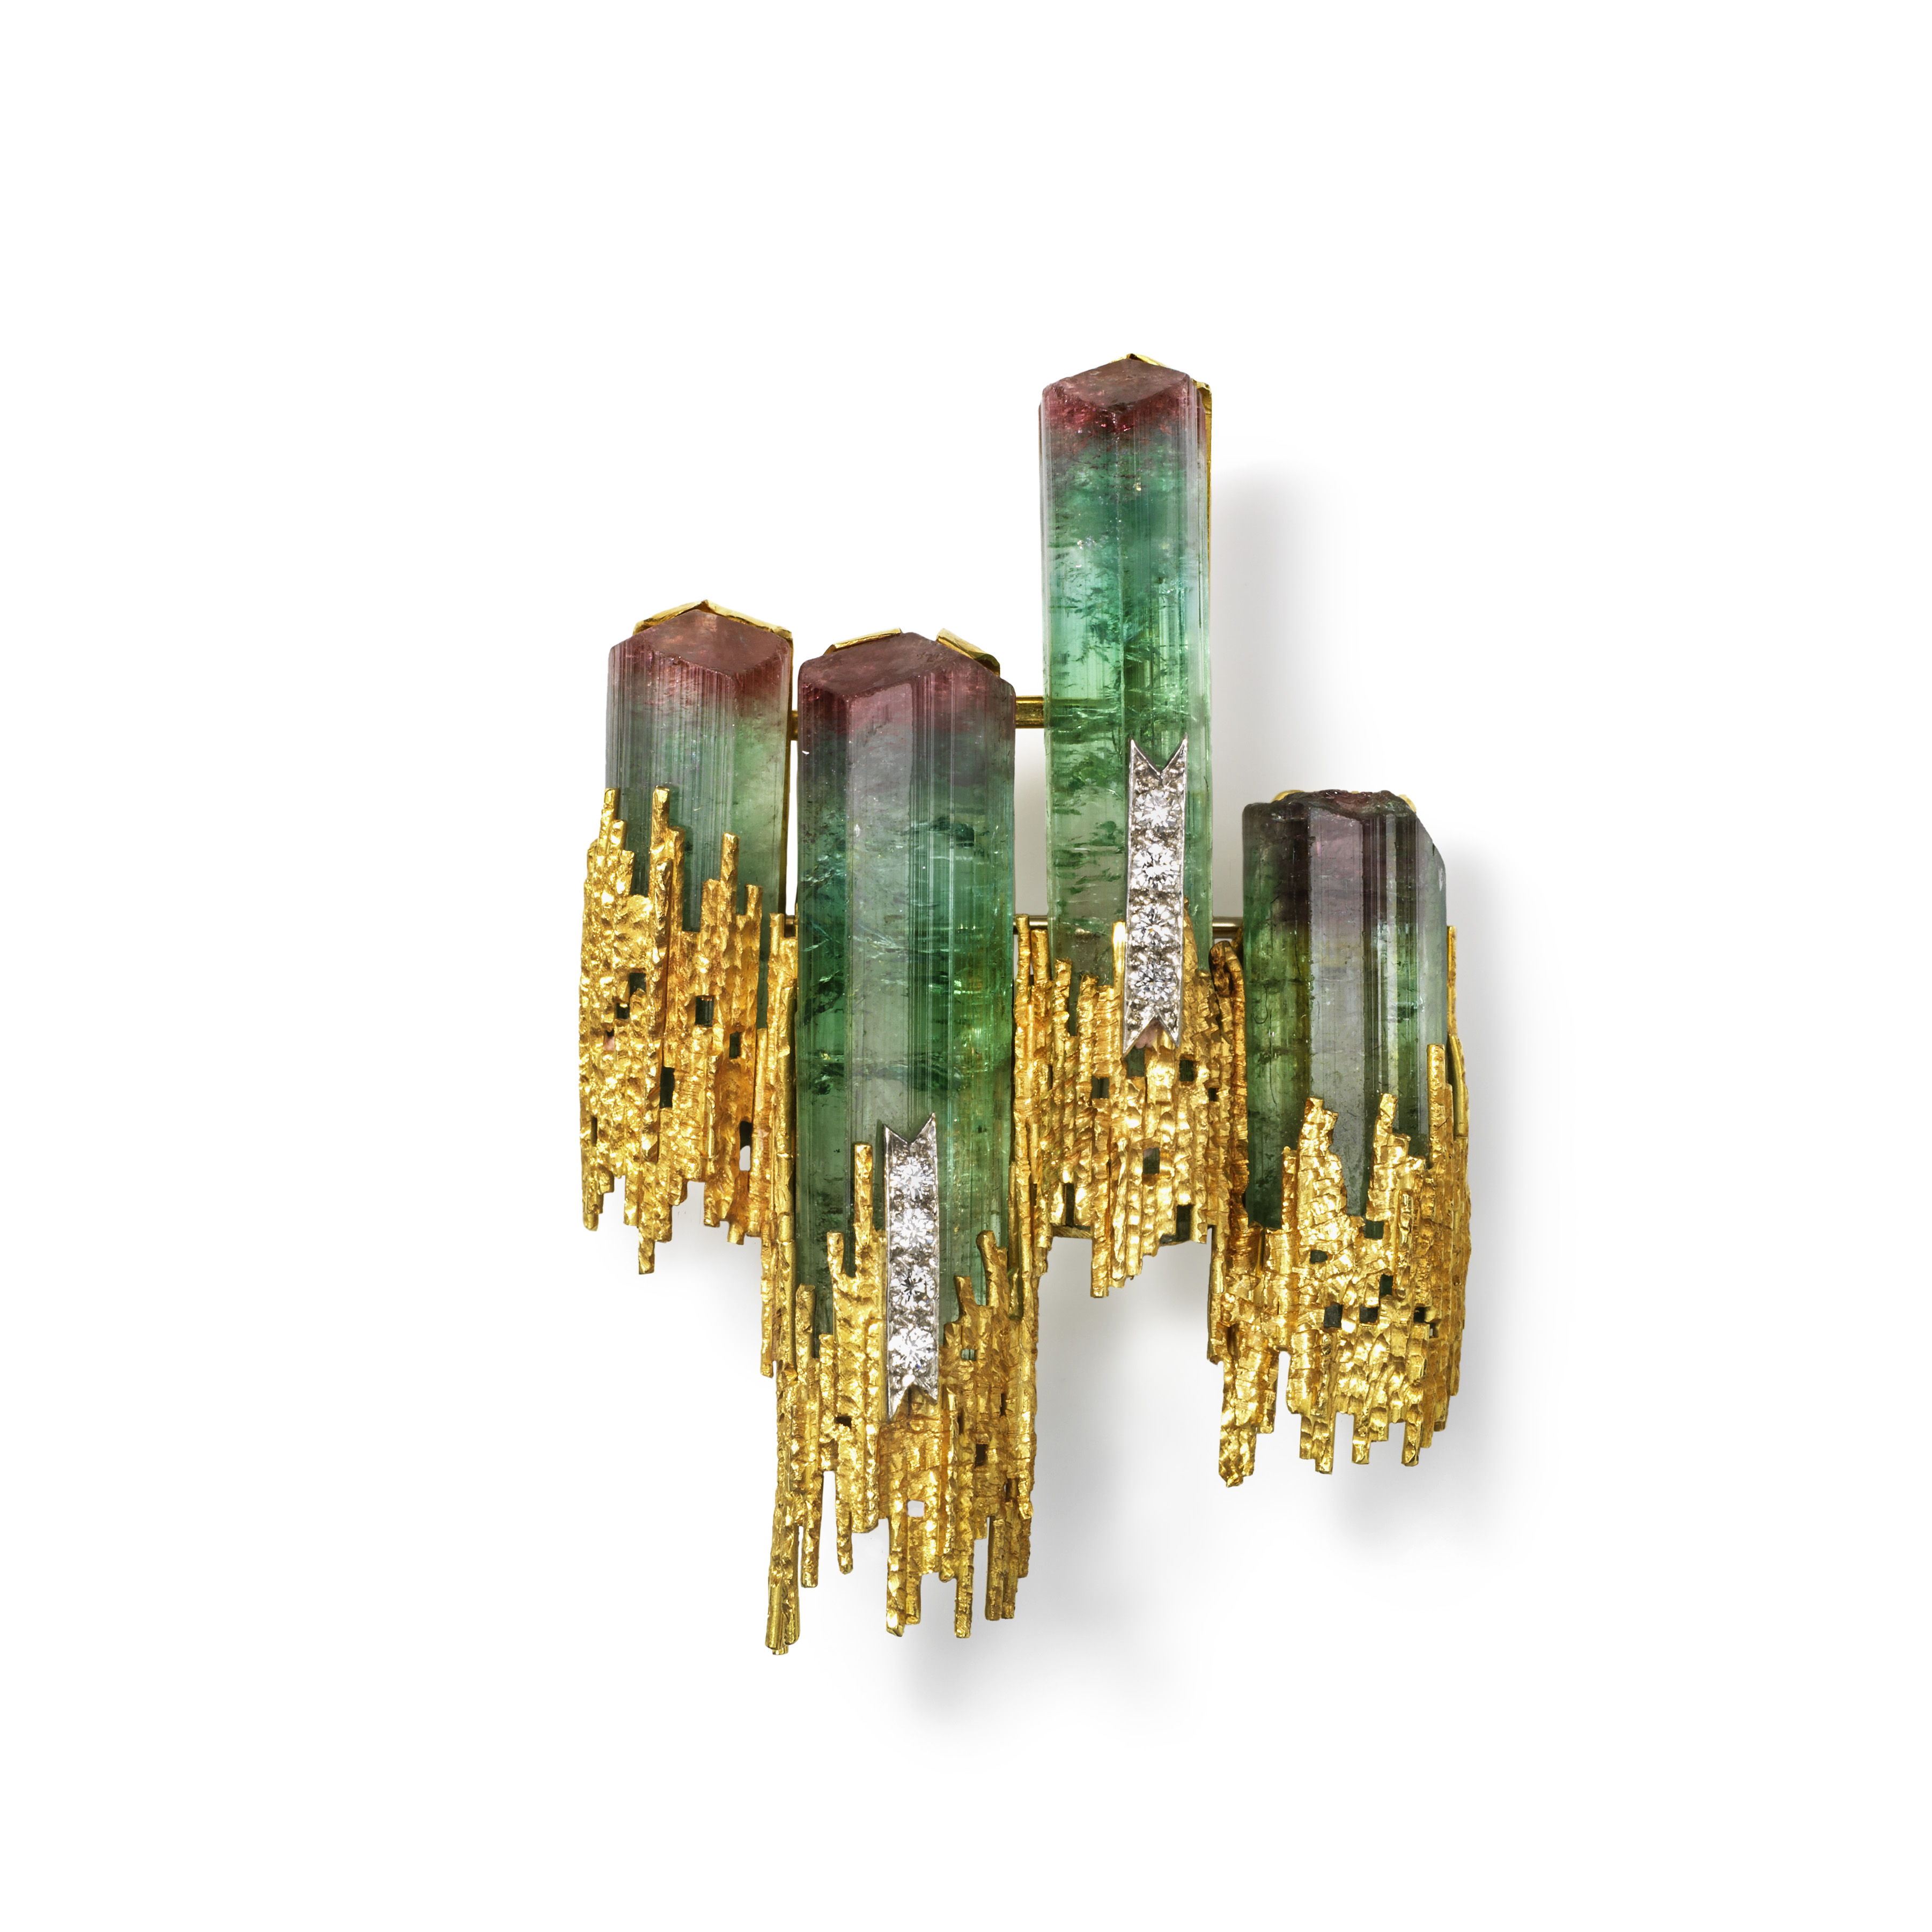 Andrew Grima (1921-2007), Italy, worked in England, Brooch, 1969, gold, watermelon tourmaline, diamonds, Courtesy of the Cincinnati Art Museum, Collection of Kimberly Klosterman, Photography by Tony Walsh